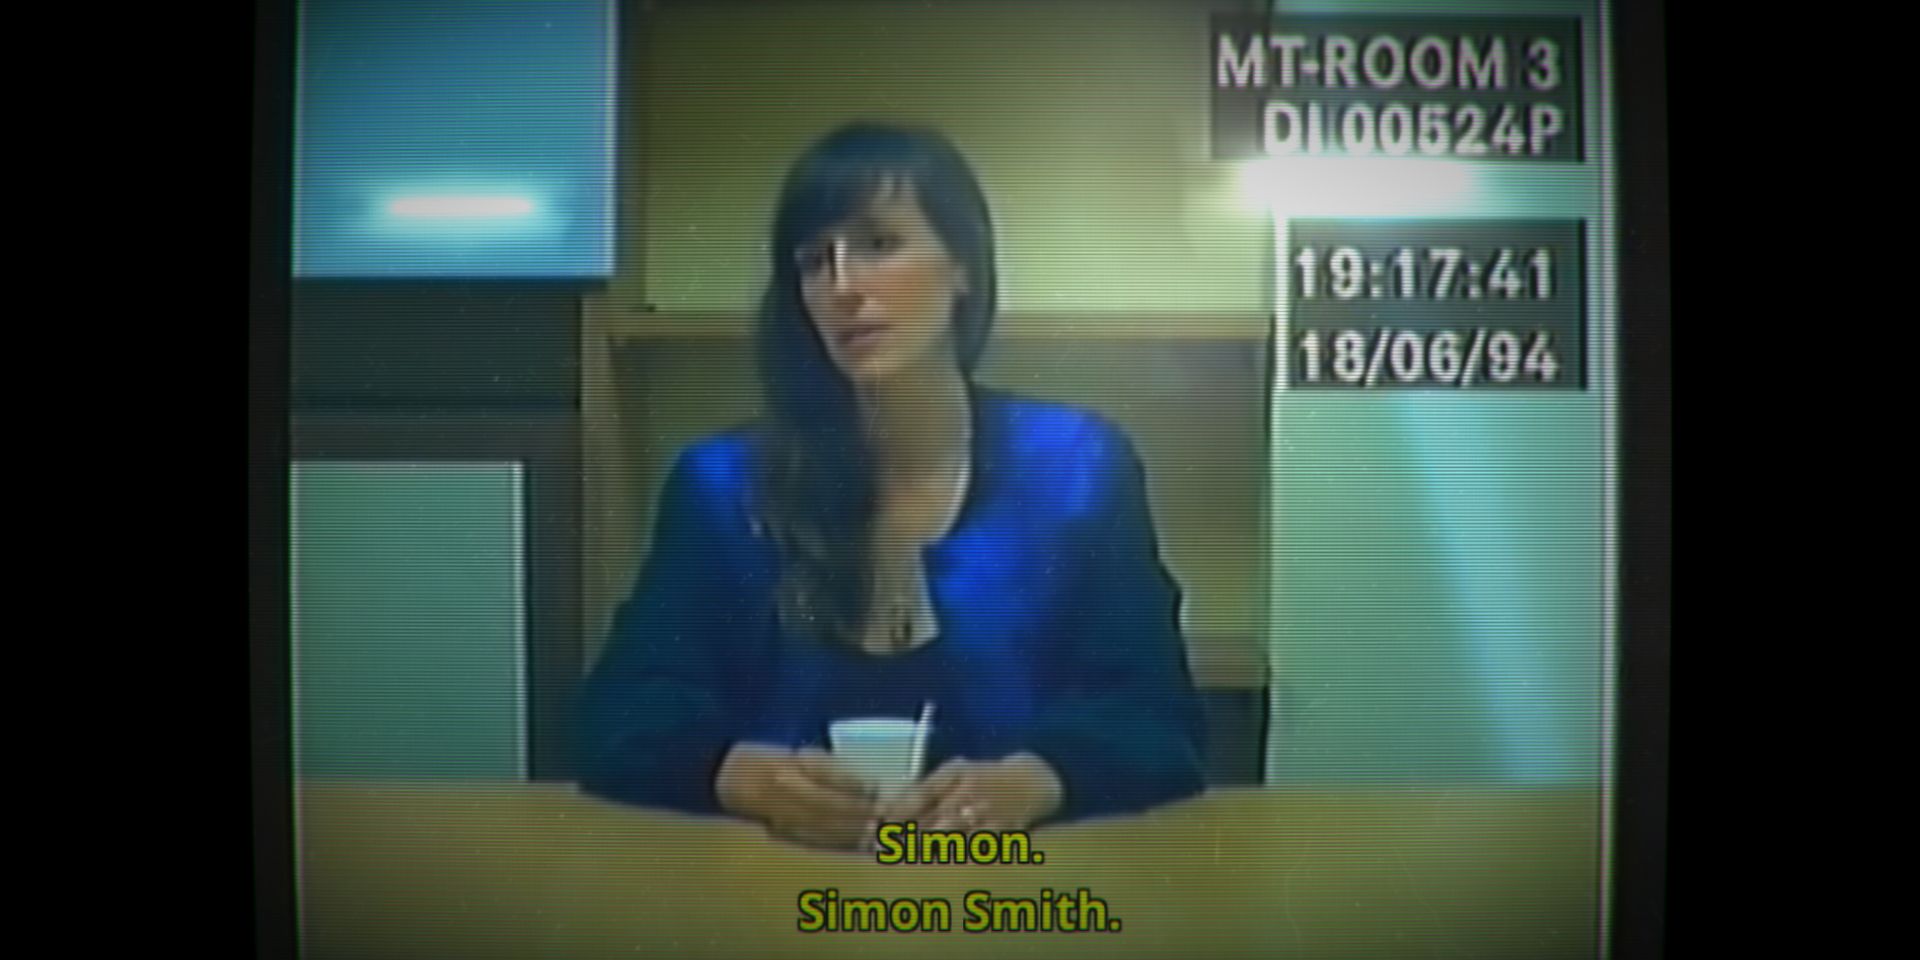 An image of a TV screen showing a woman confessing in the game Her Story.